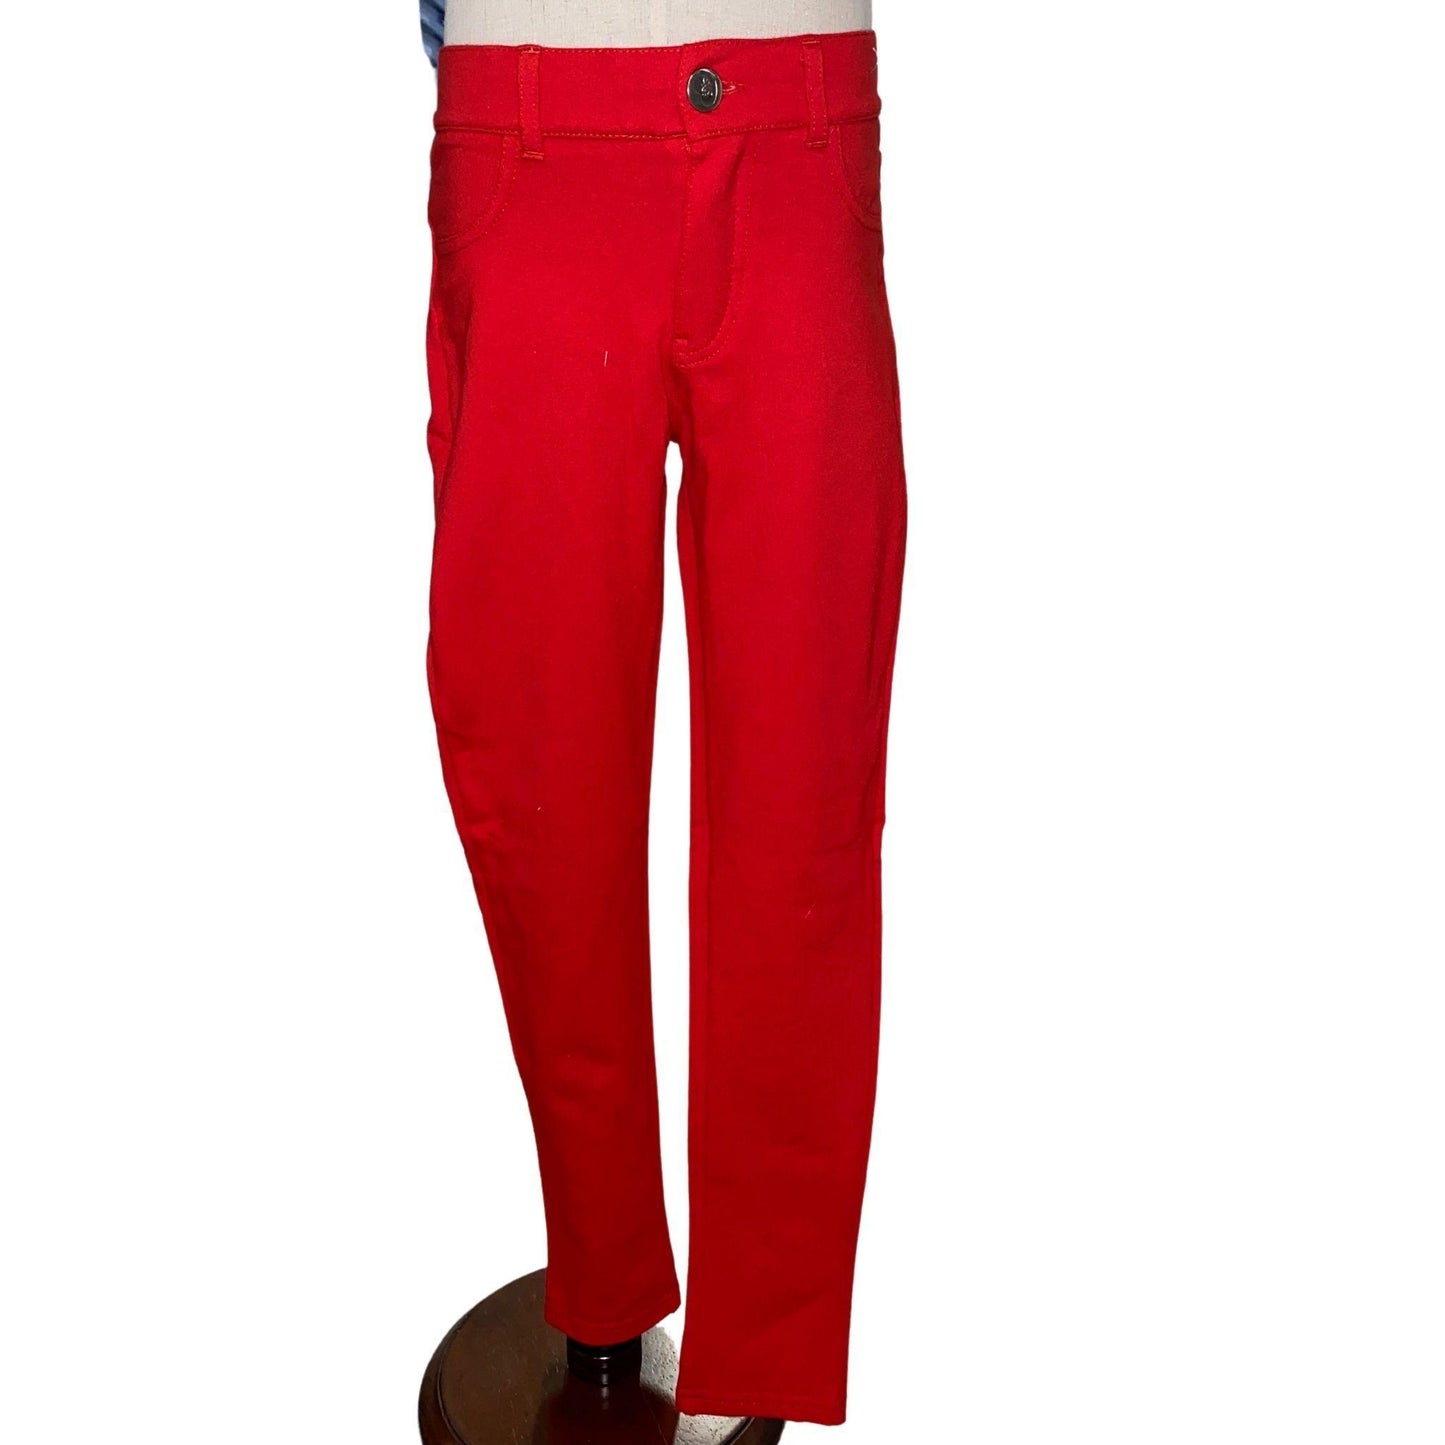 These comfortable, stretchy, red jeggings are a perfect addition to your little diva's wardrobe.  This style features a button closure and pockets on the back.